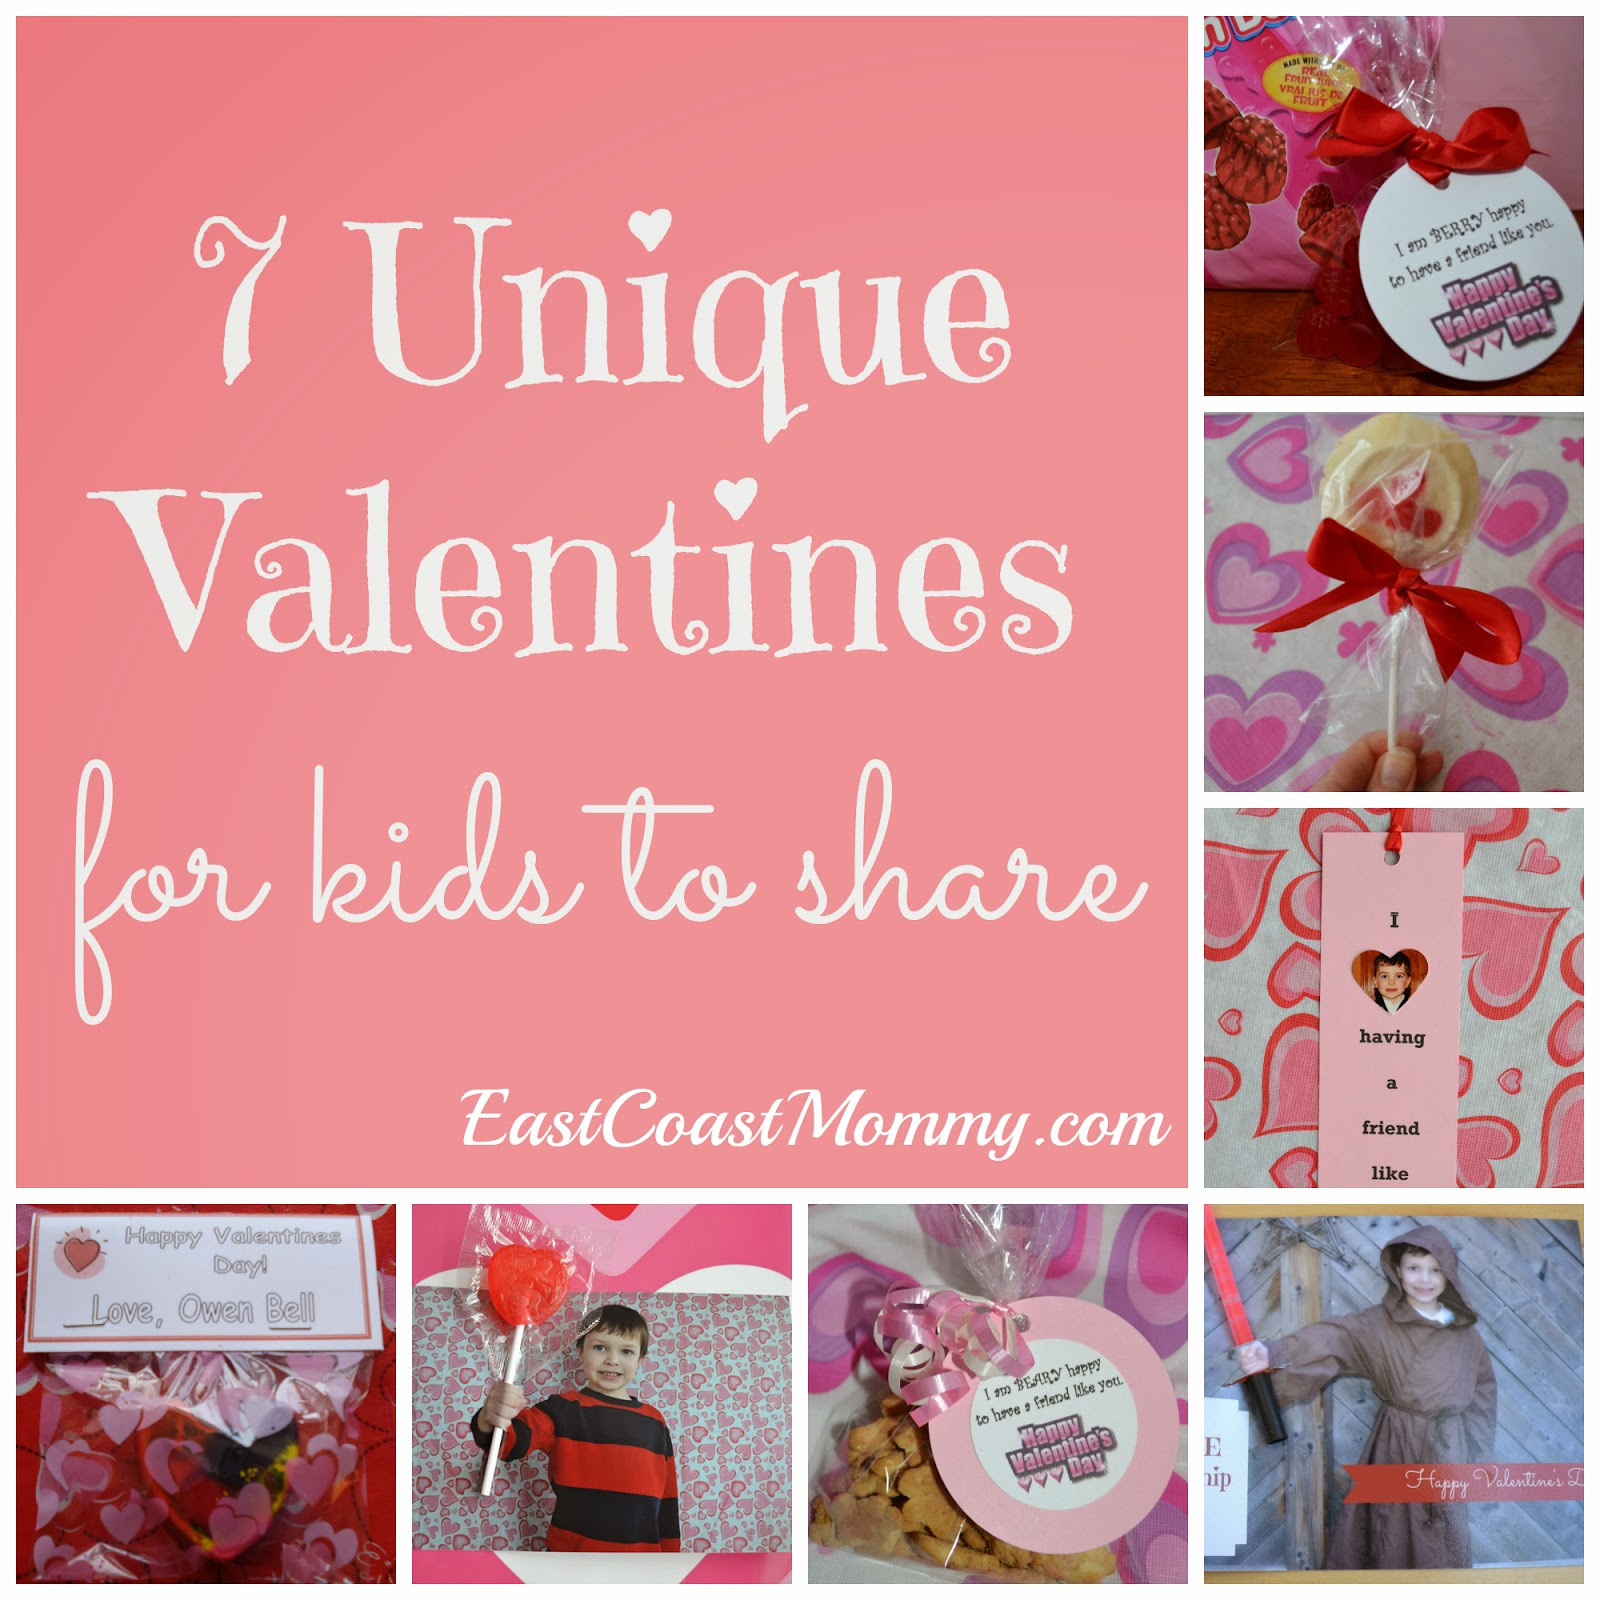 Cool Valentine Gift Ideas
 East Coast Mommy 7 Unique Valentines for kids to share